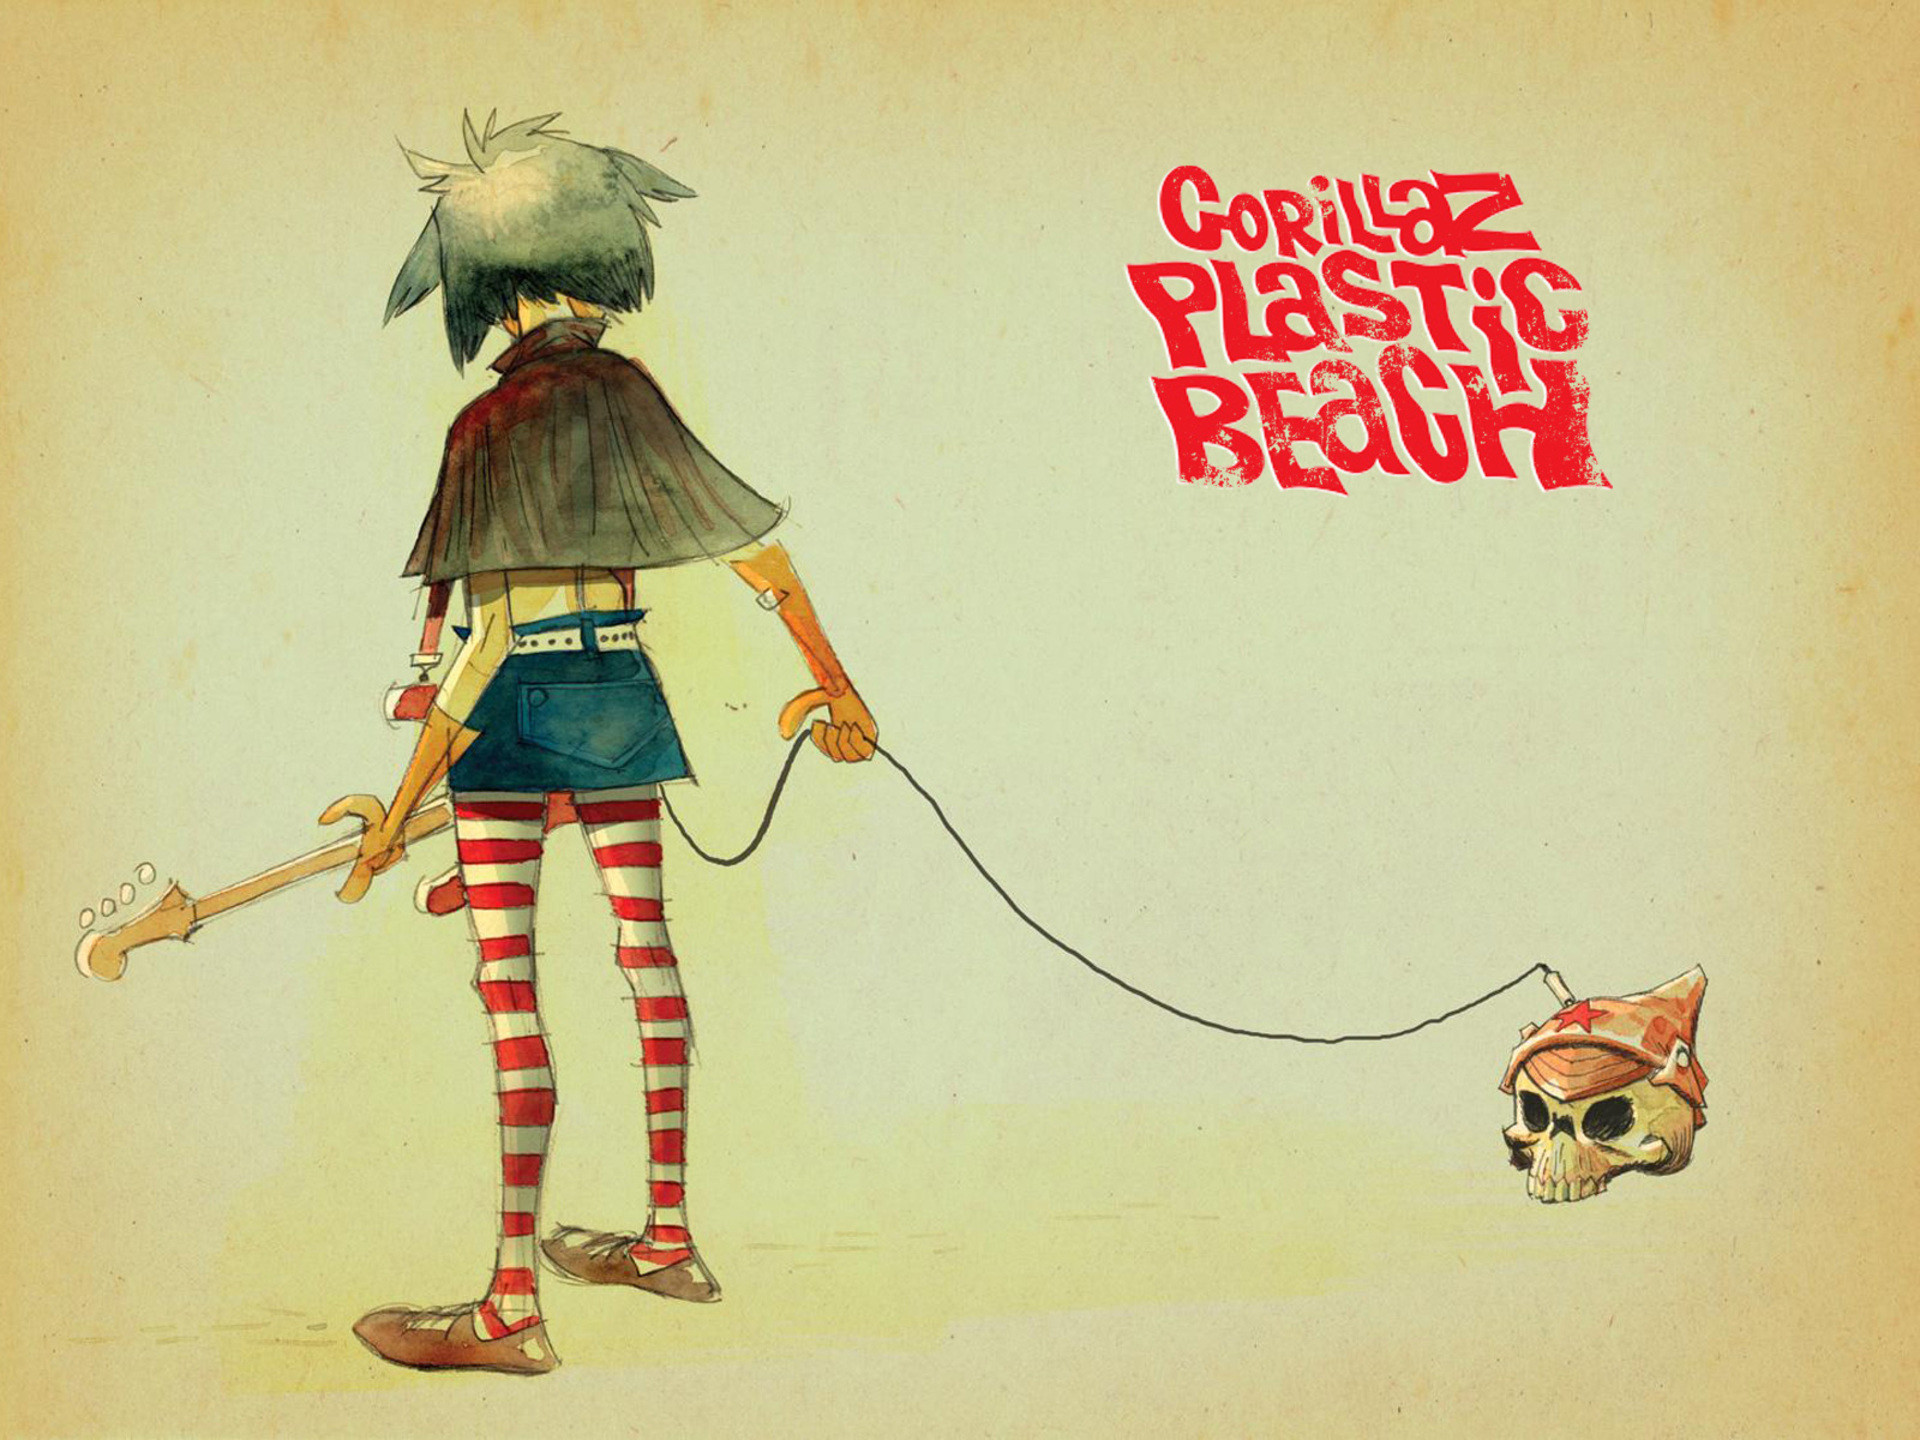 1920x1440 Gorillaz images Plastic Beach HD wallpaper and background photos